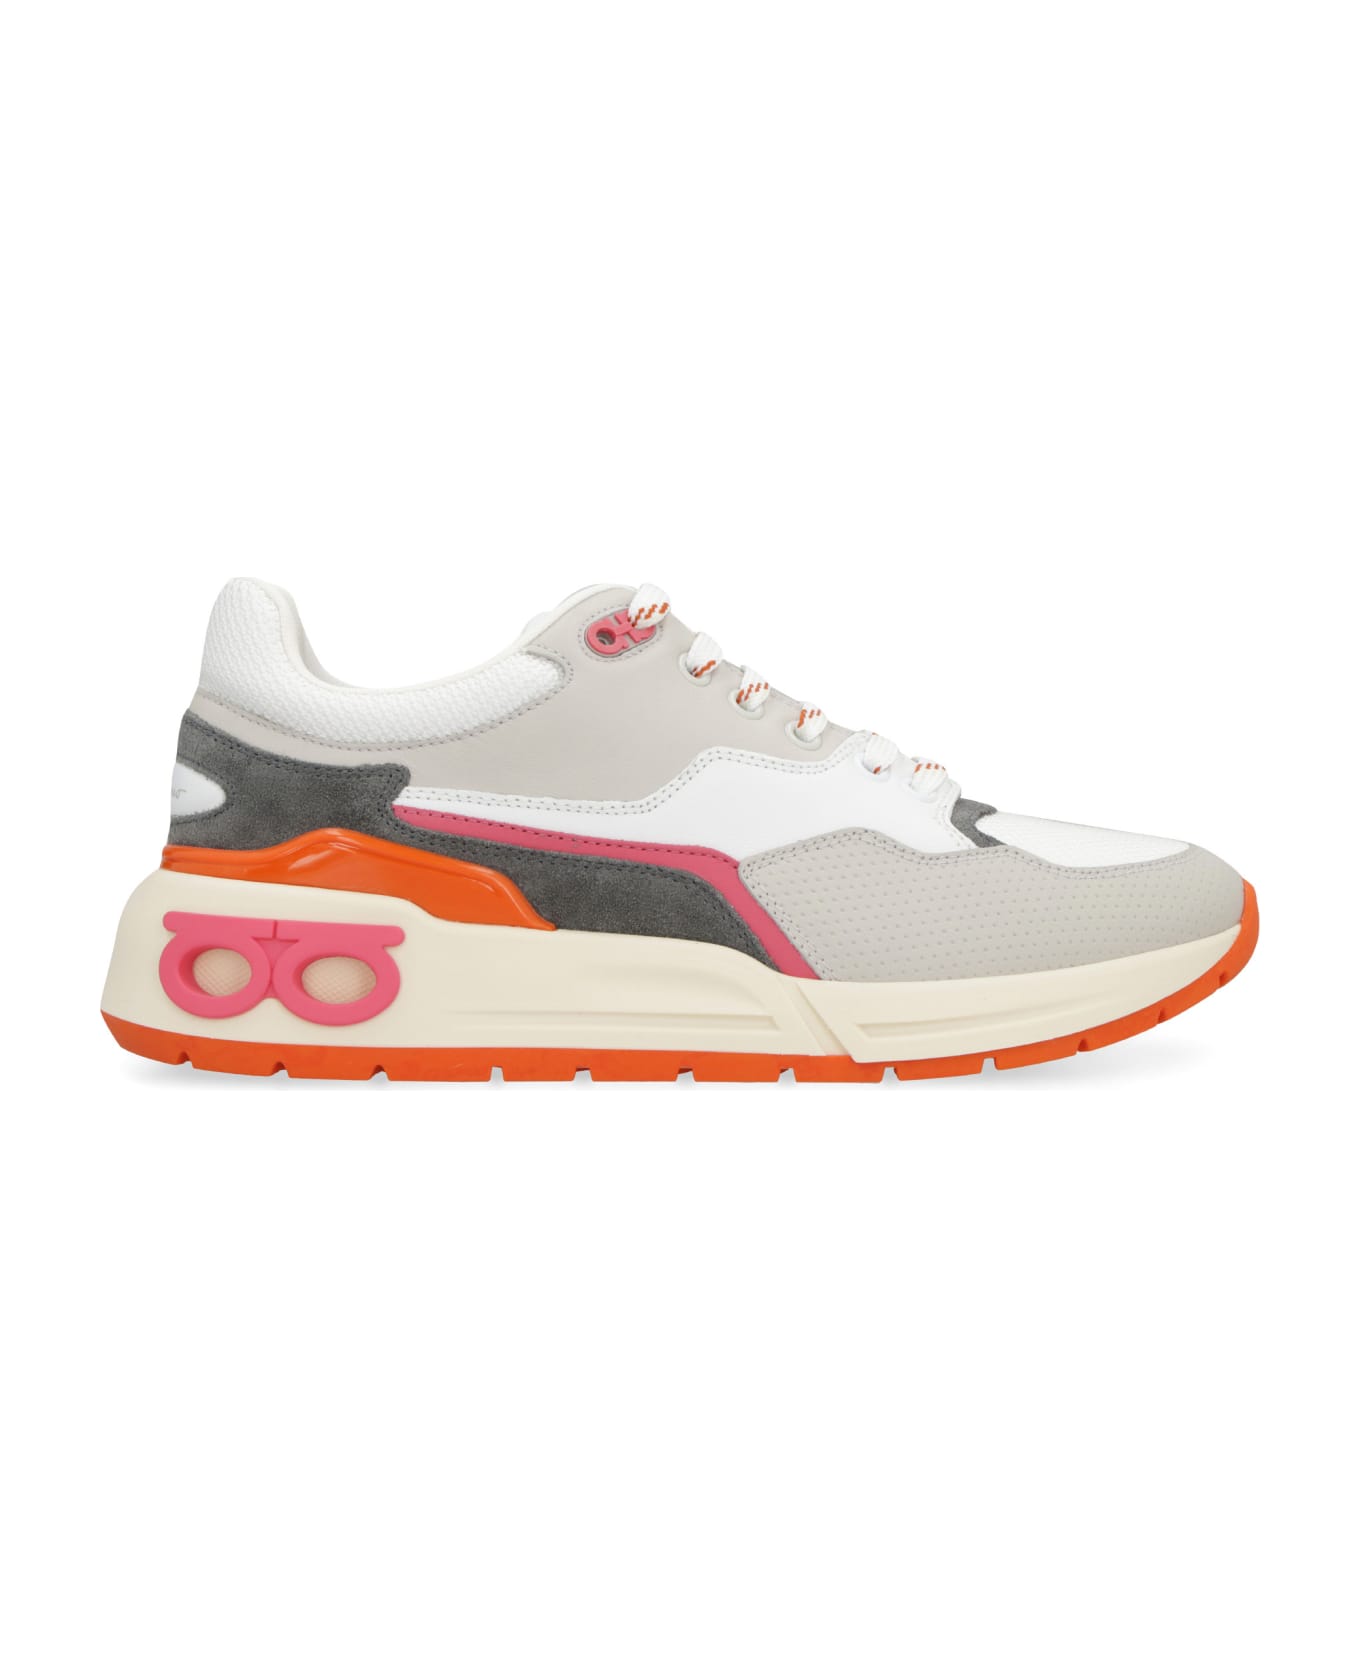 Ferragamo Leather And Fabric Low-top Sneakers - Multicolor